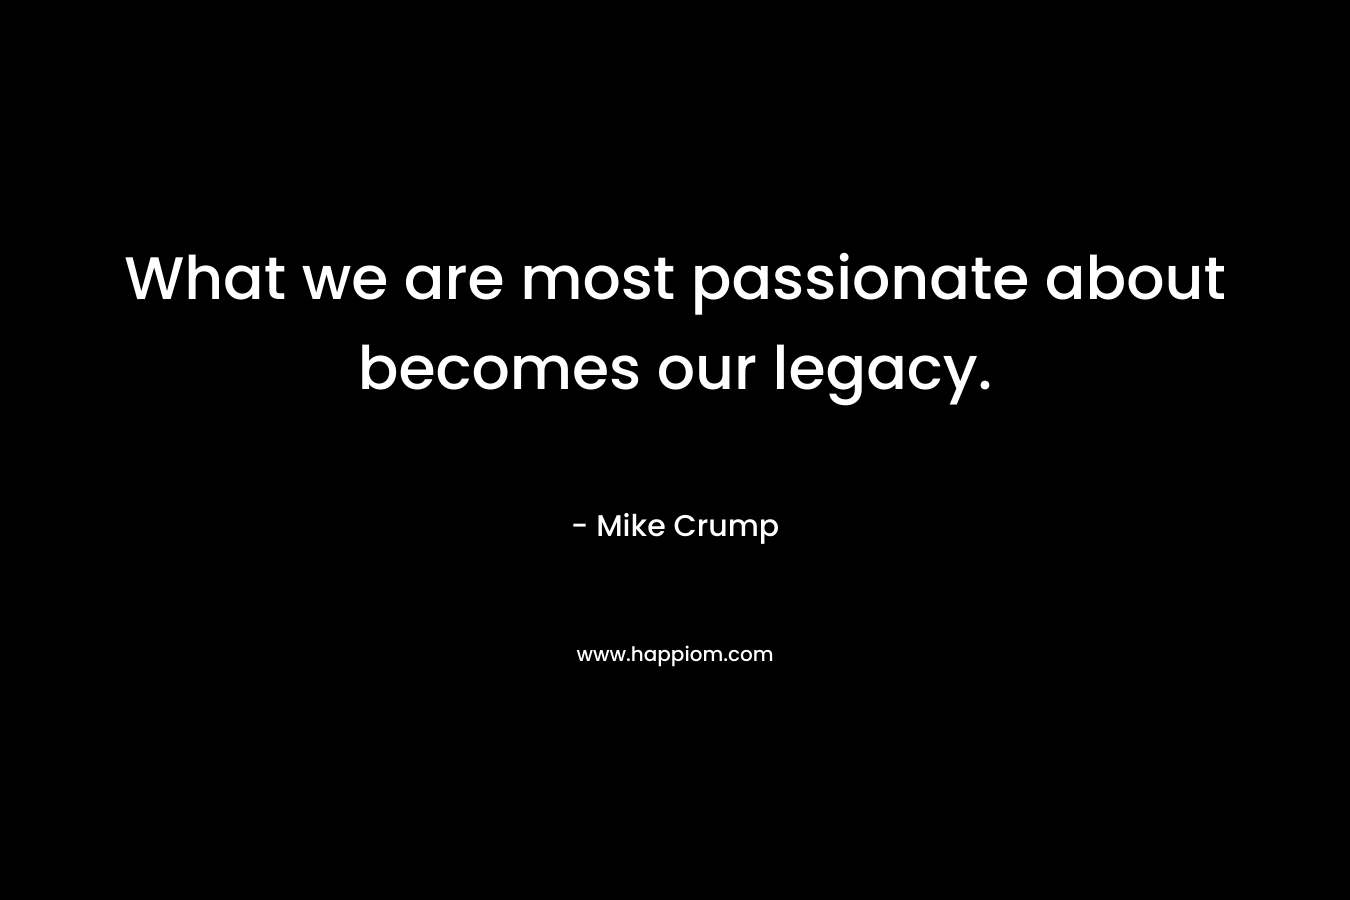 What we are most passionate about becomes our legacy.